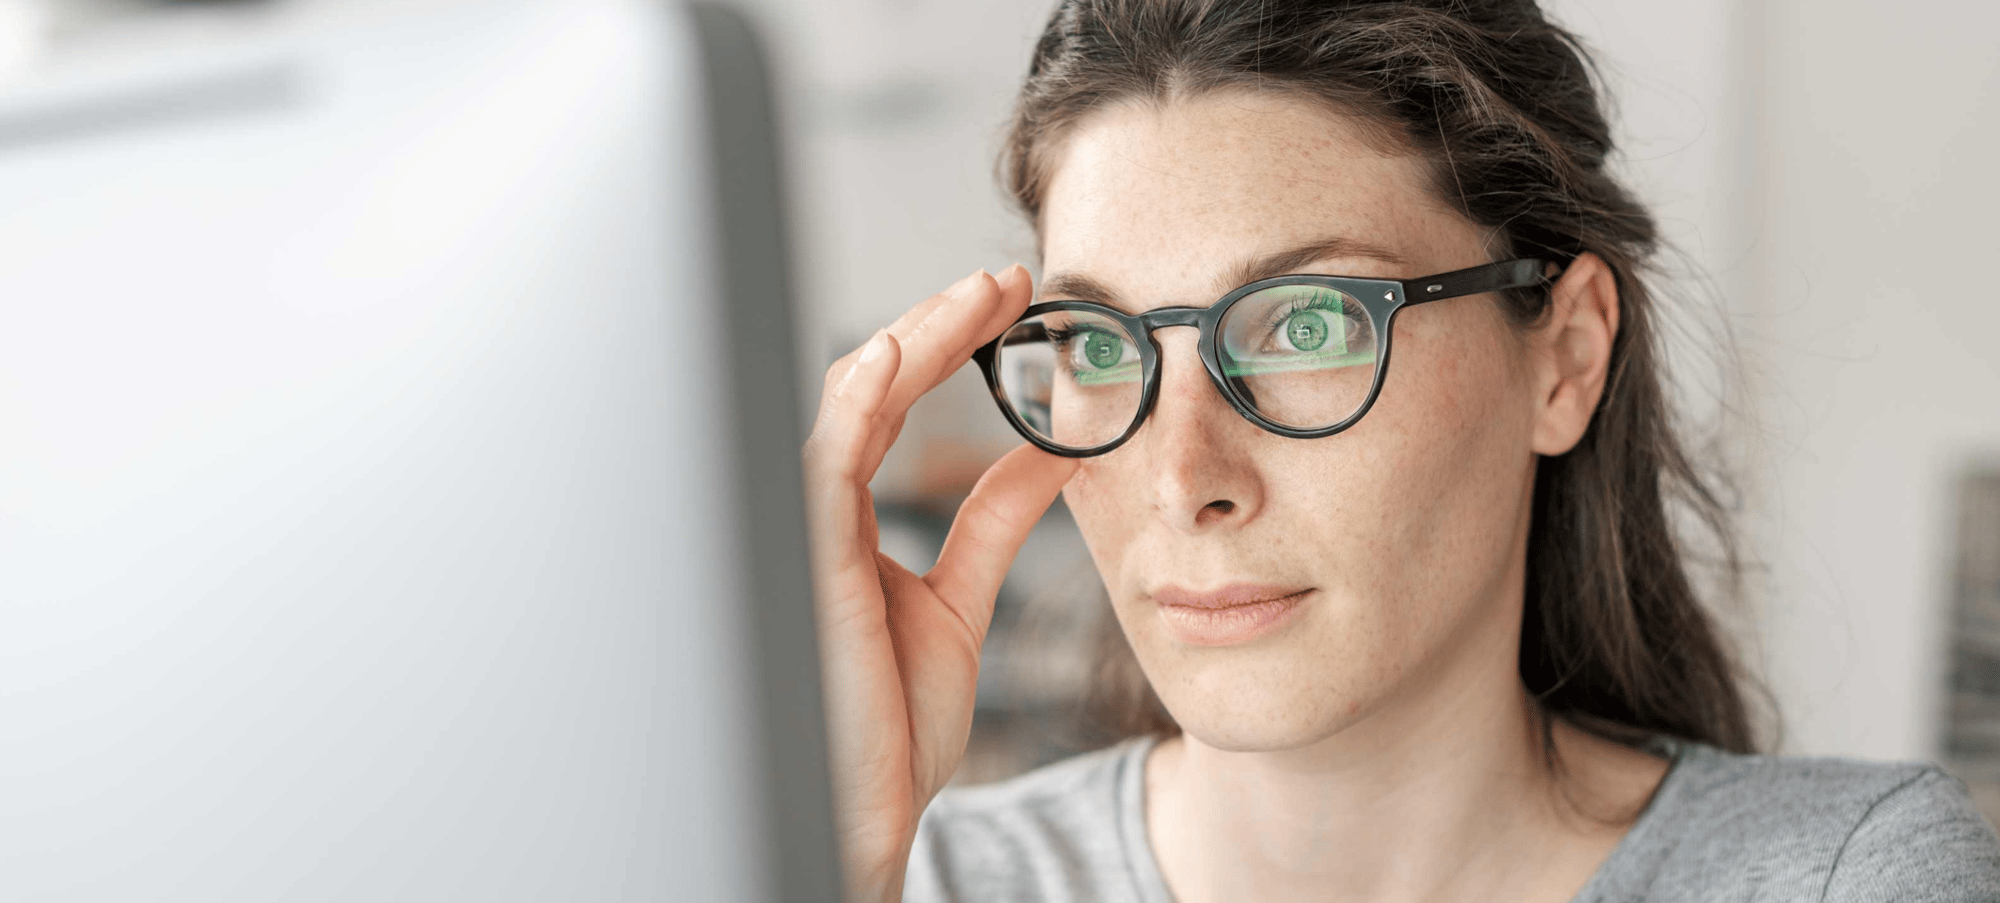 Woman staring at computer screen with hands on her glasses